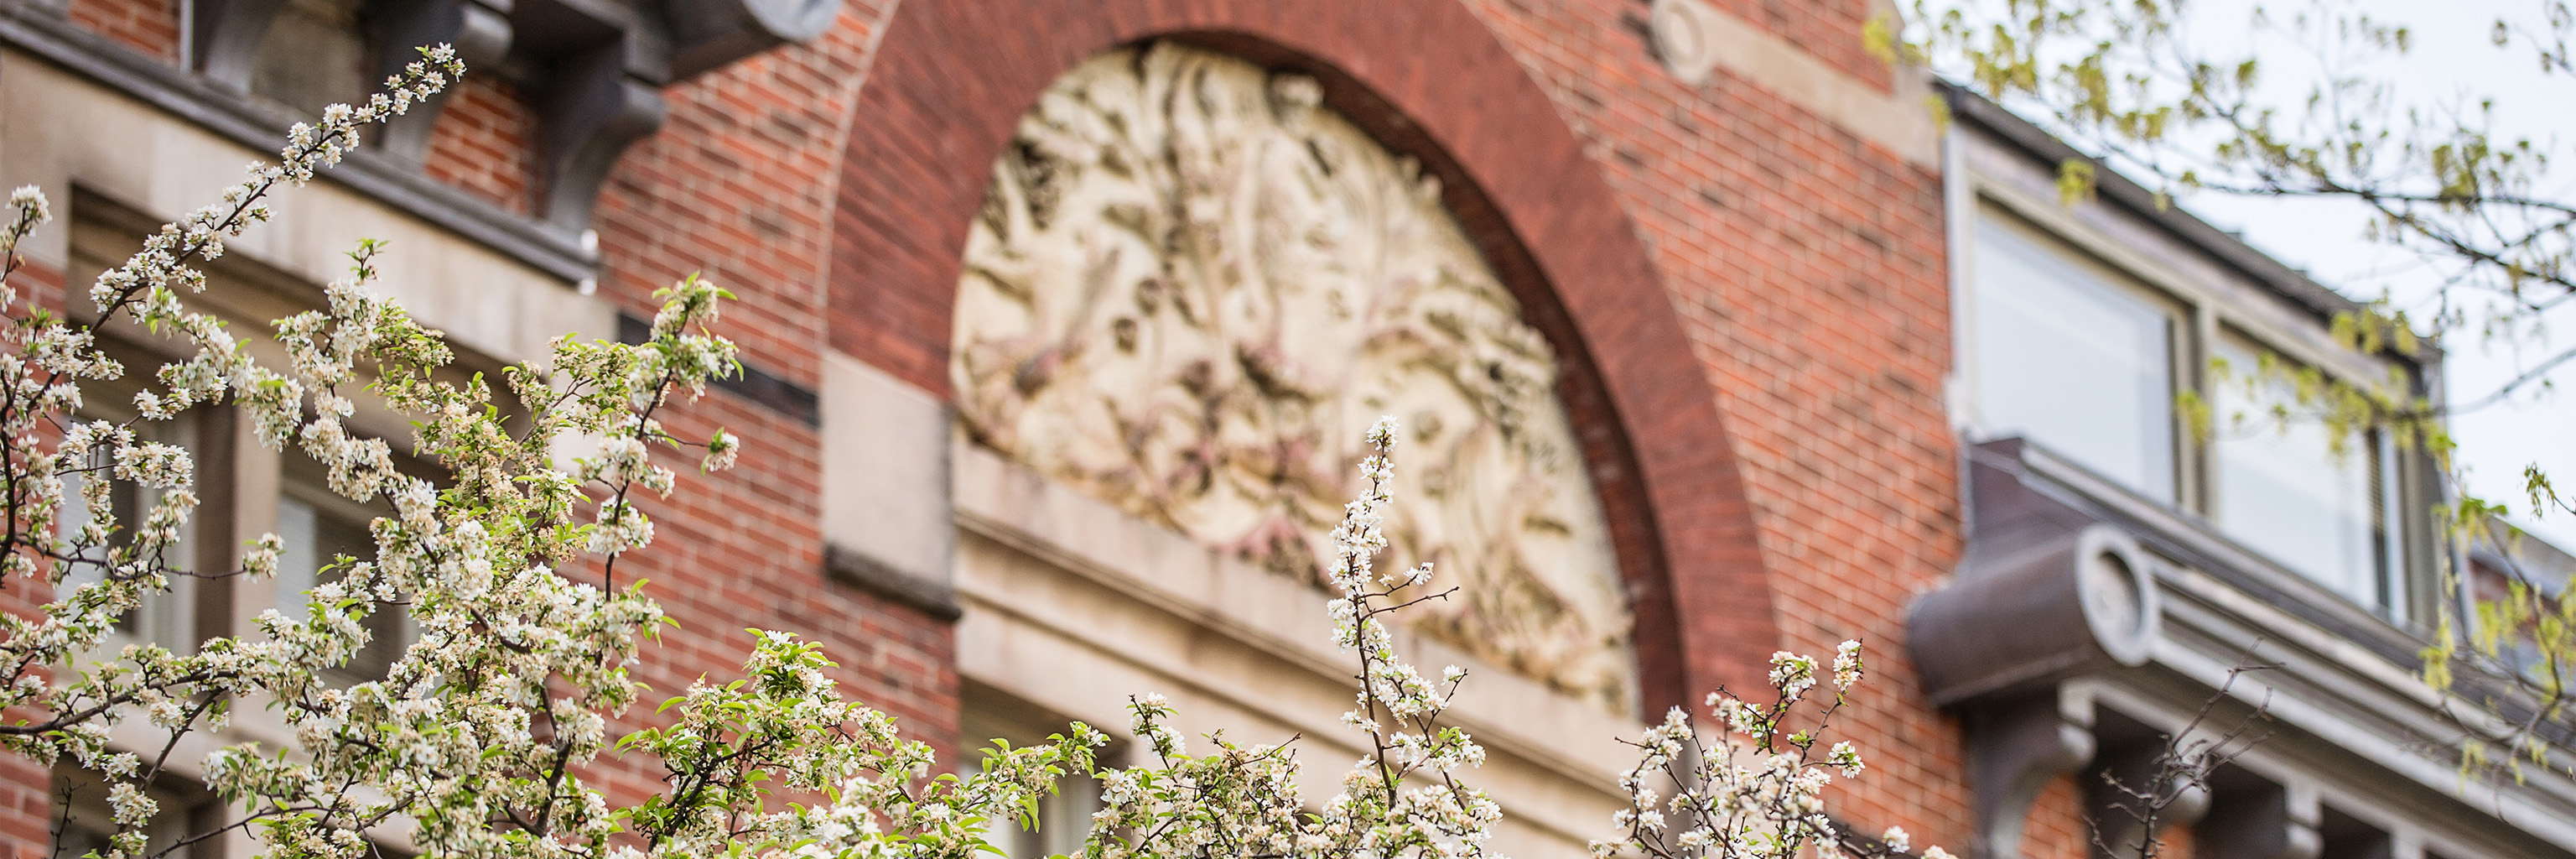 Close-up of flowers in front of an ornately decorated brick building.